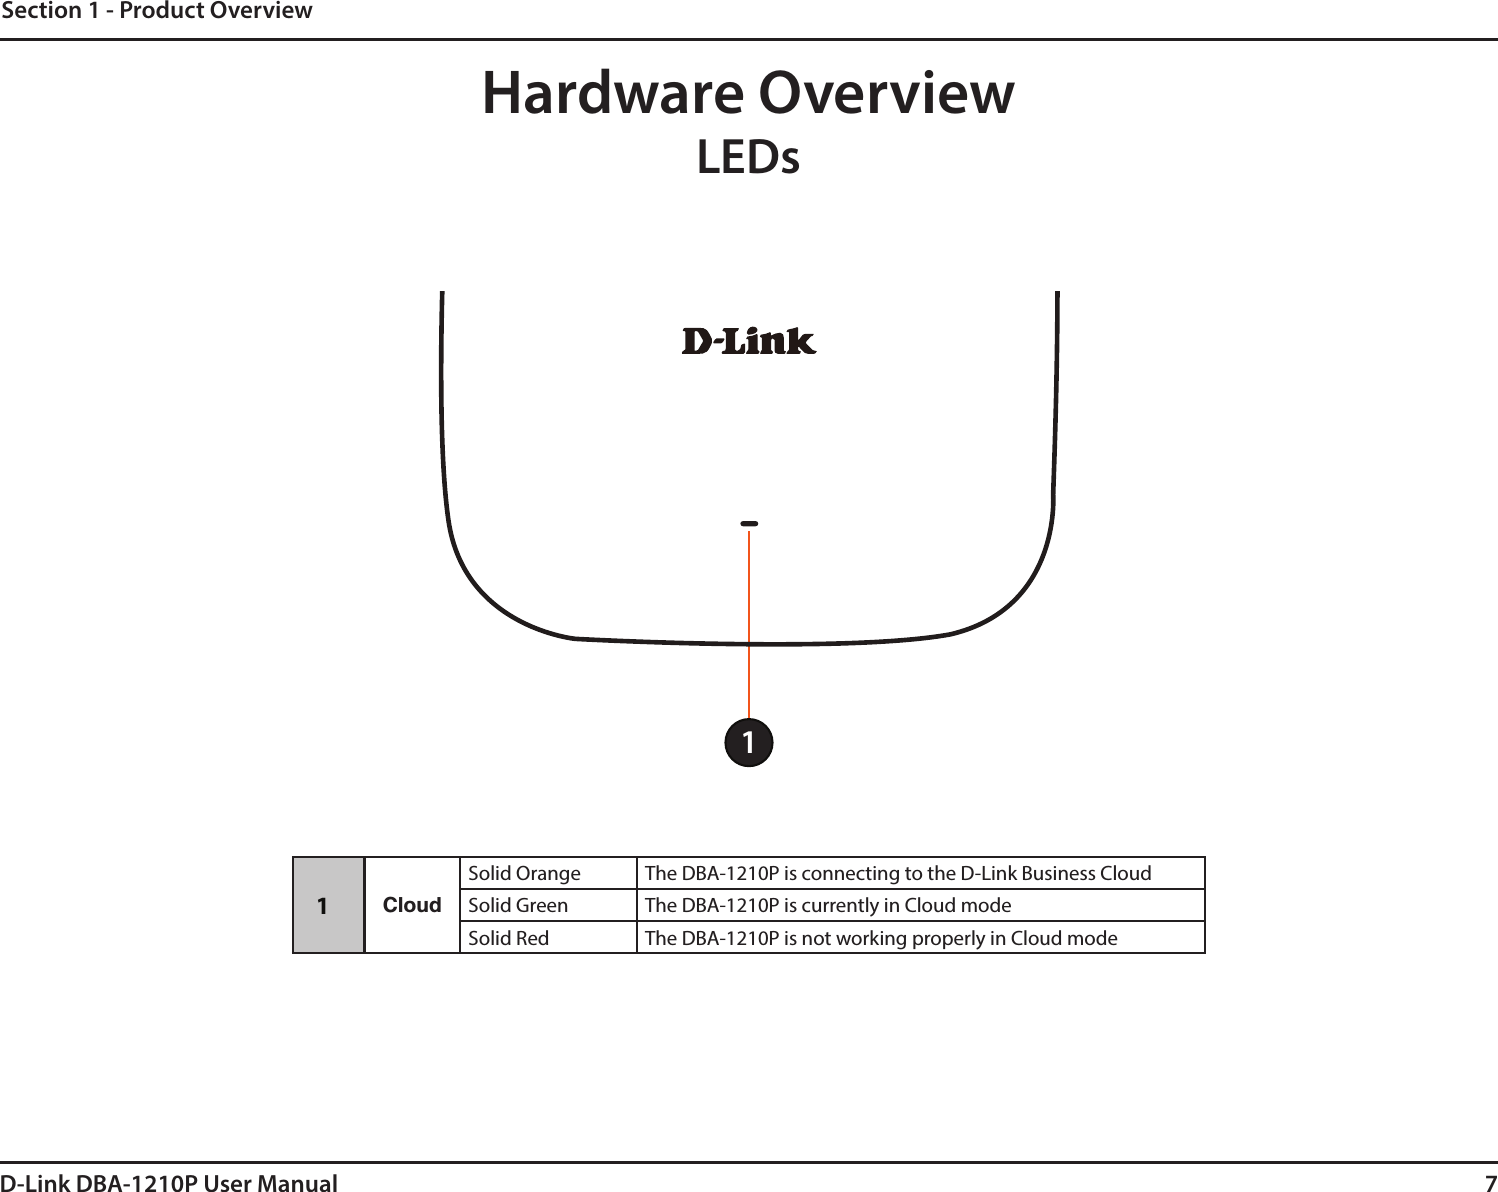 7D-Link DBA-1210P User ManualSection 1 - Product OverviewHardware OverviewLEDs1CloudSolid Orange The DBA-1210P is connecting to the D-Link Business CloudSolid Green The DBA-1210P is currently in Cloud modeSolid Red The DBA-1210P is not working properly in Cloud mode1